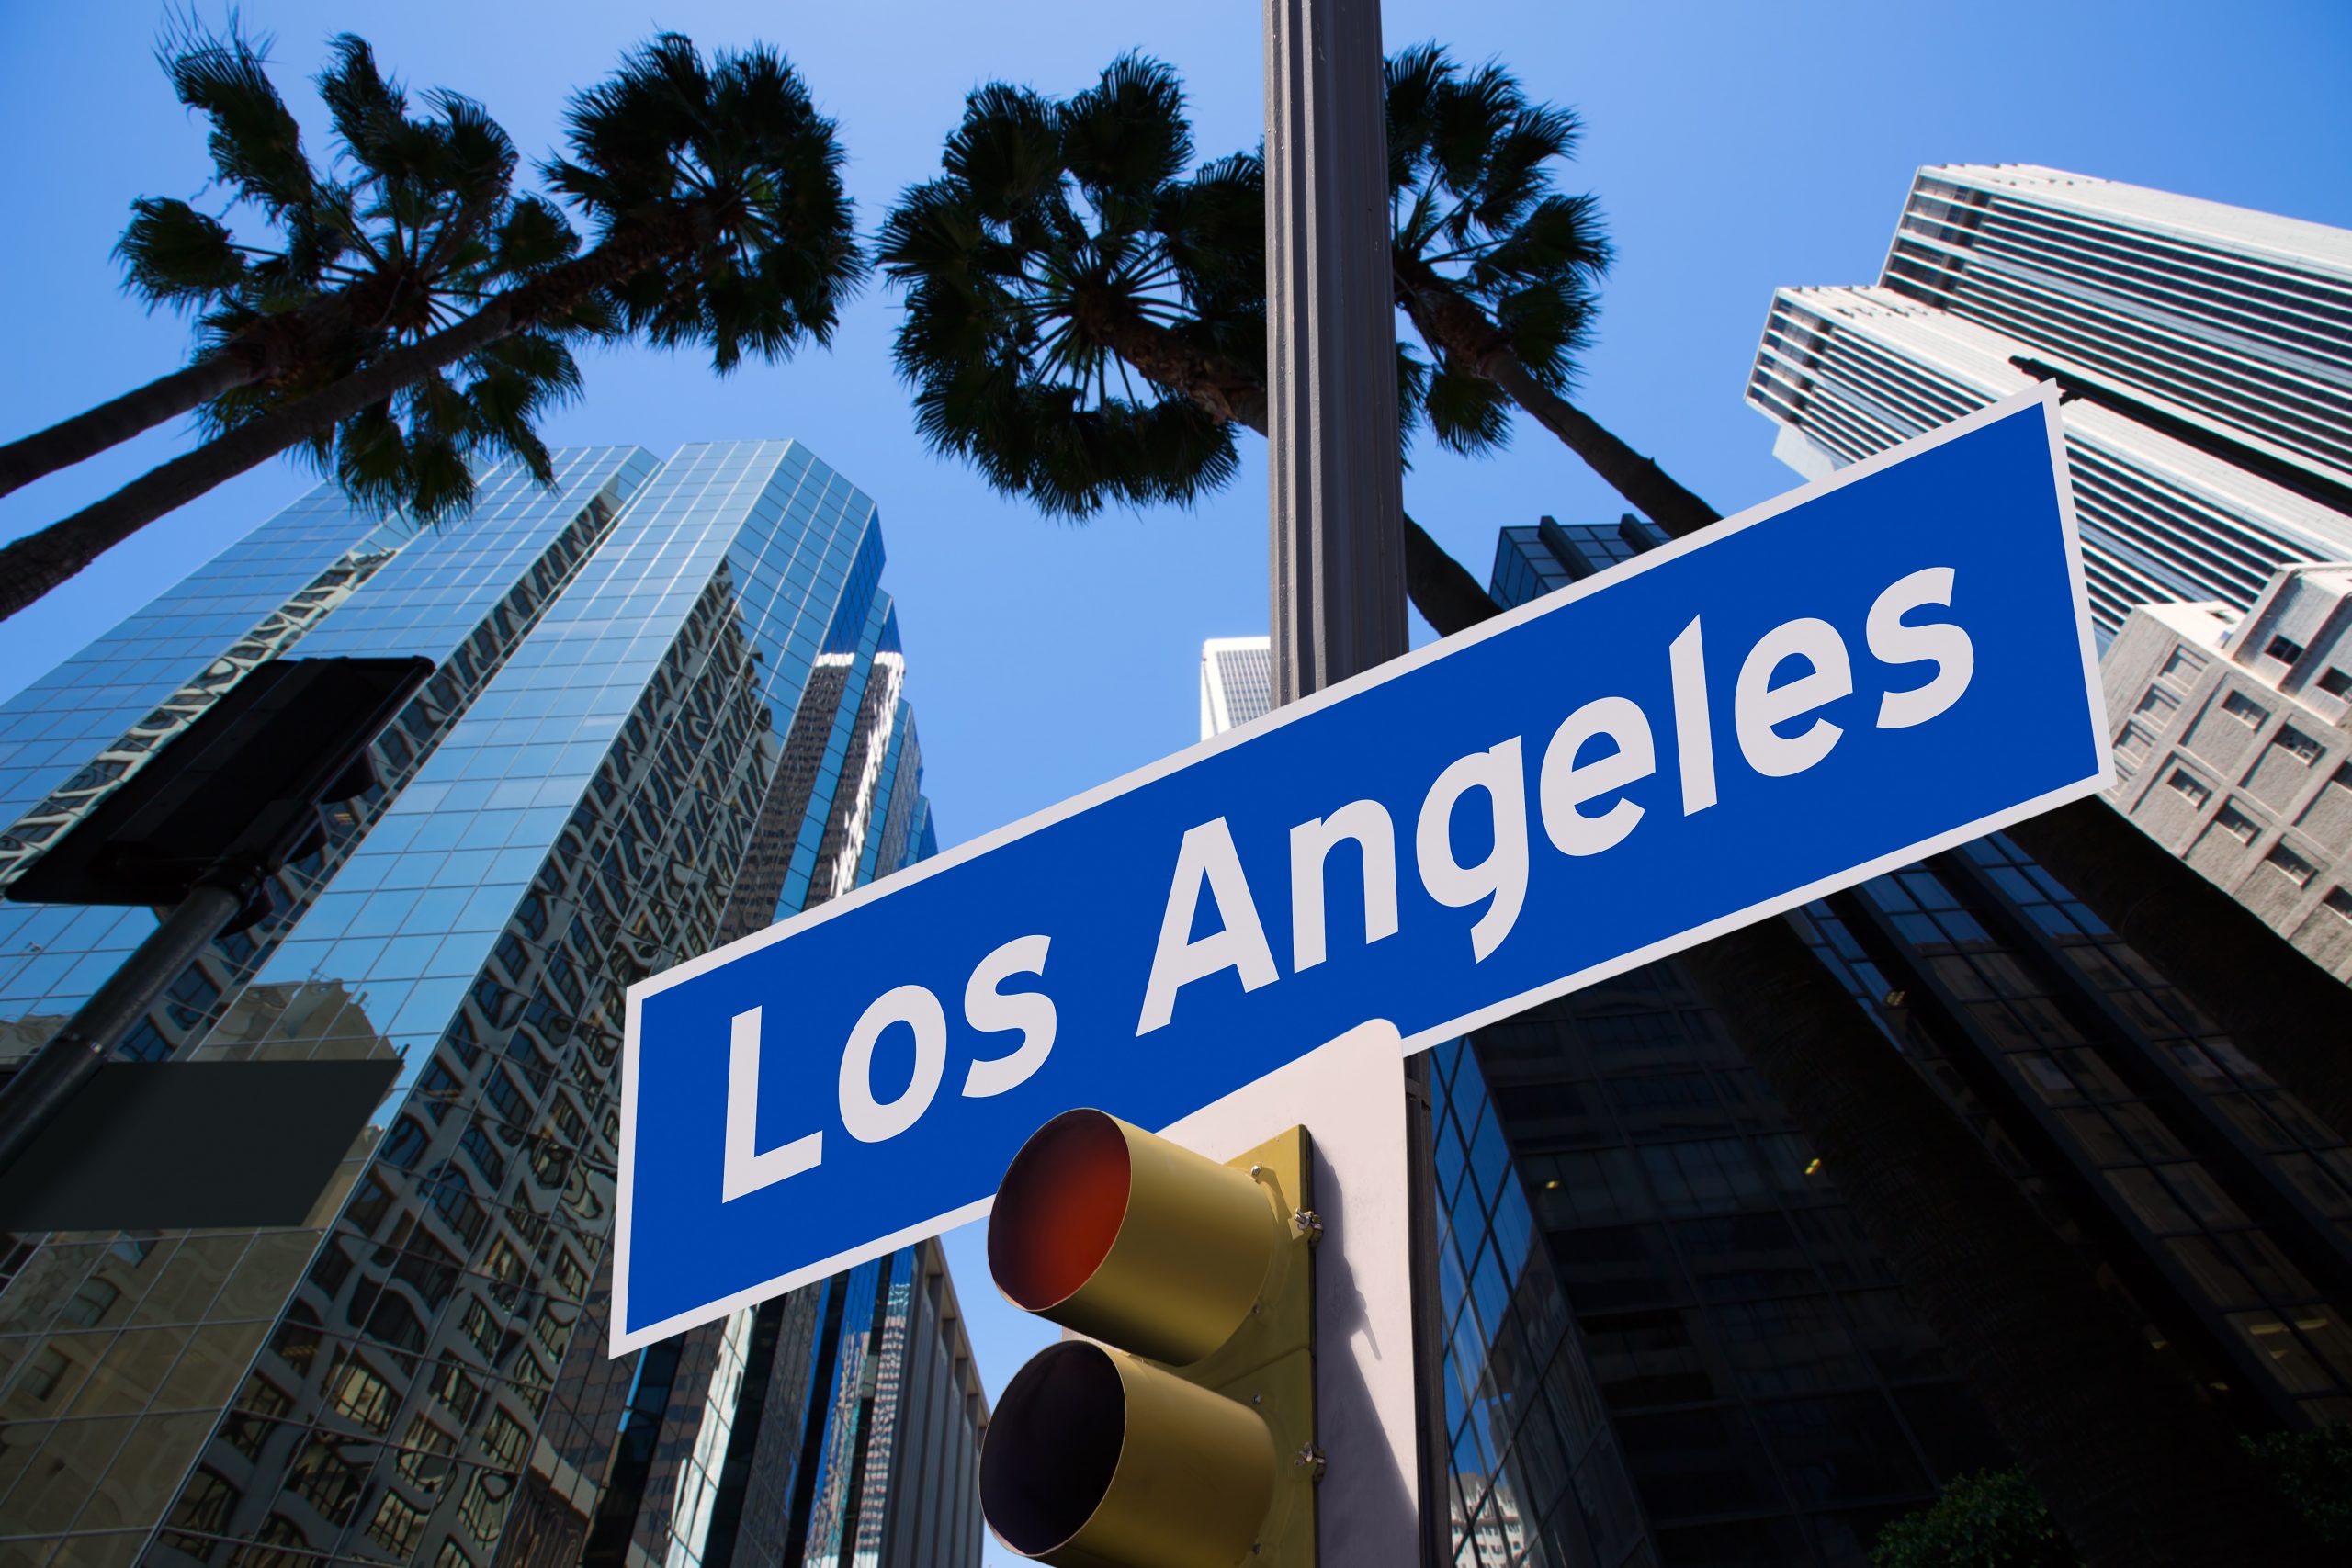 LA Los Angeles sign in redlight photo mount on downtown image